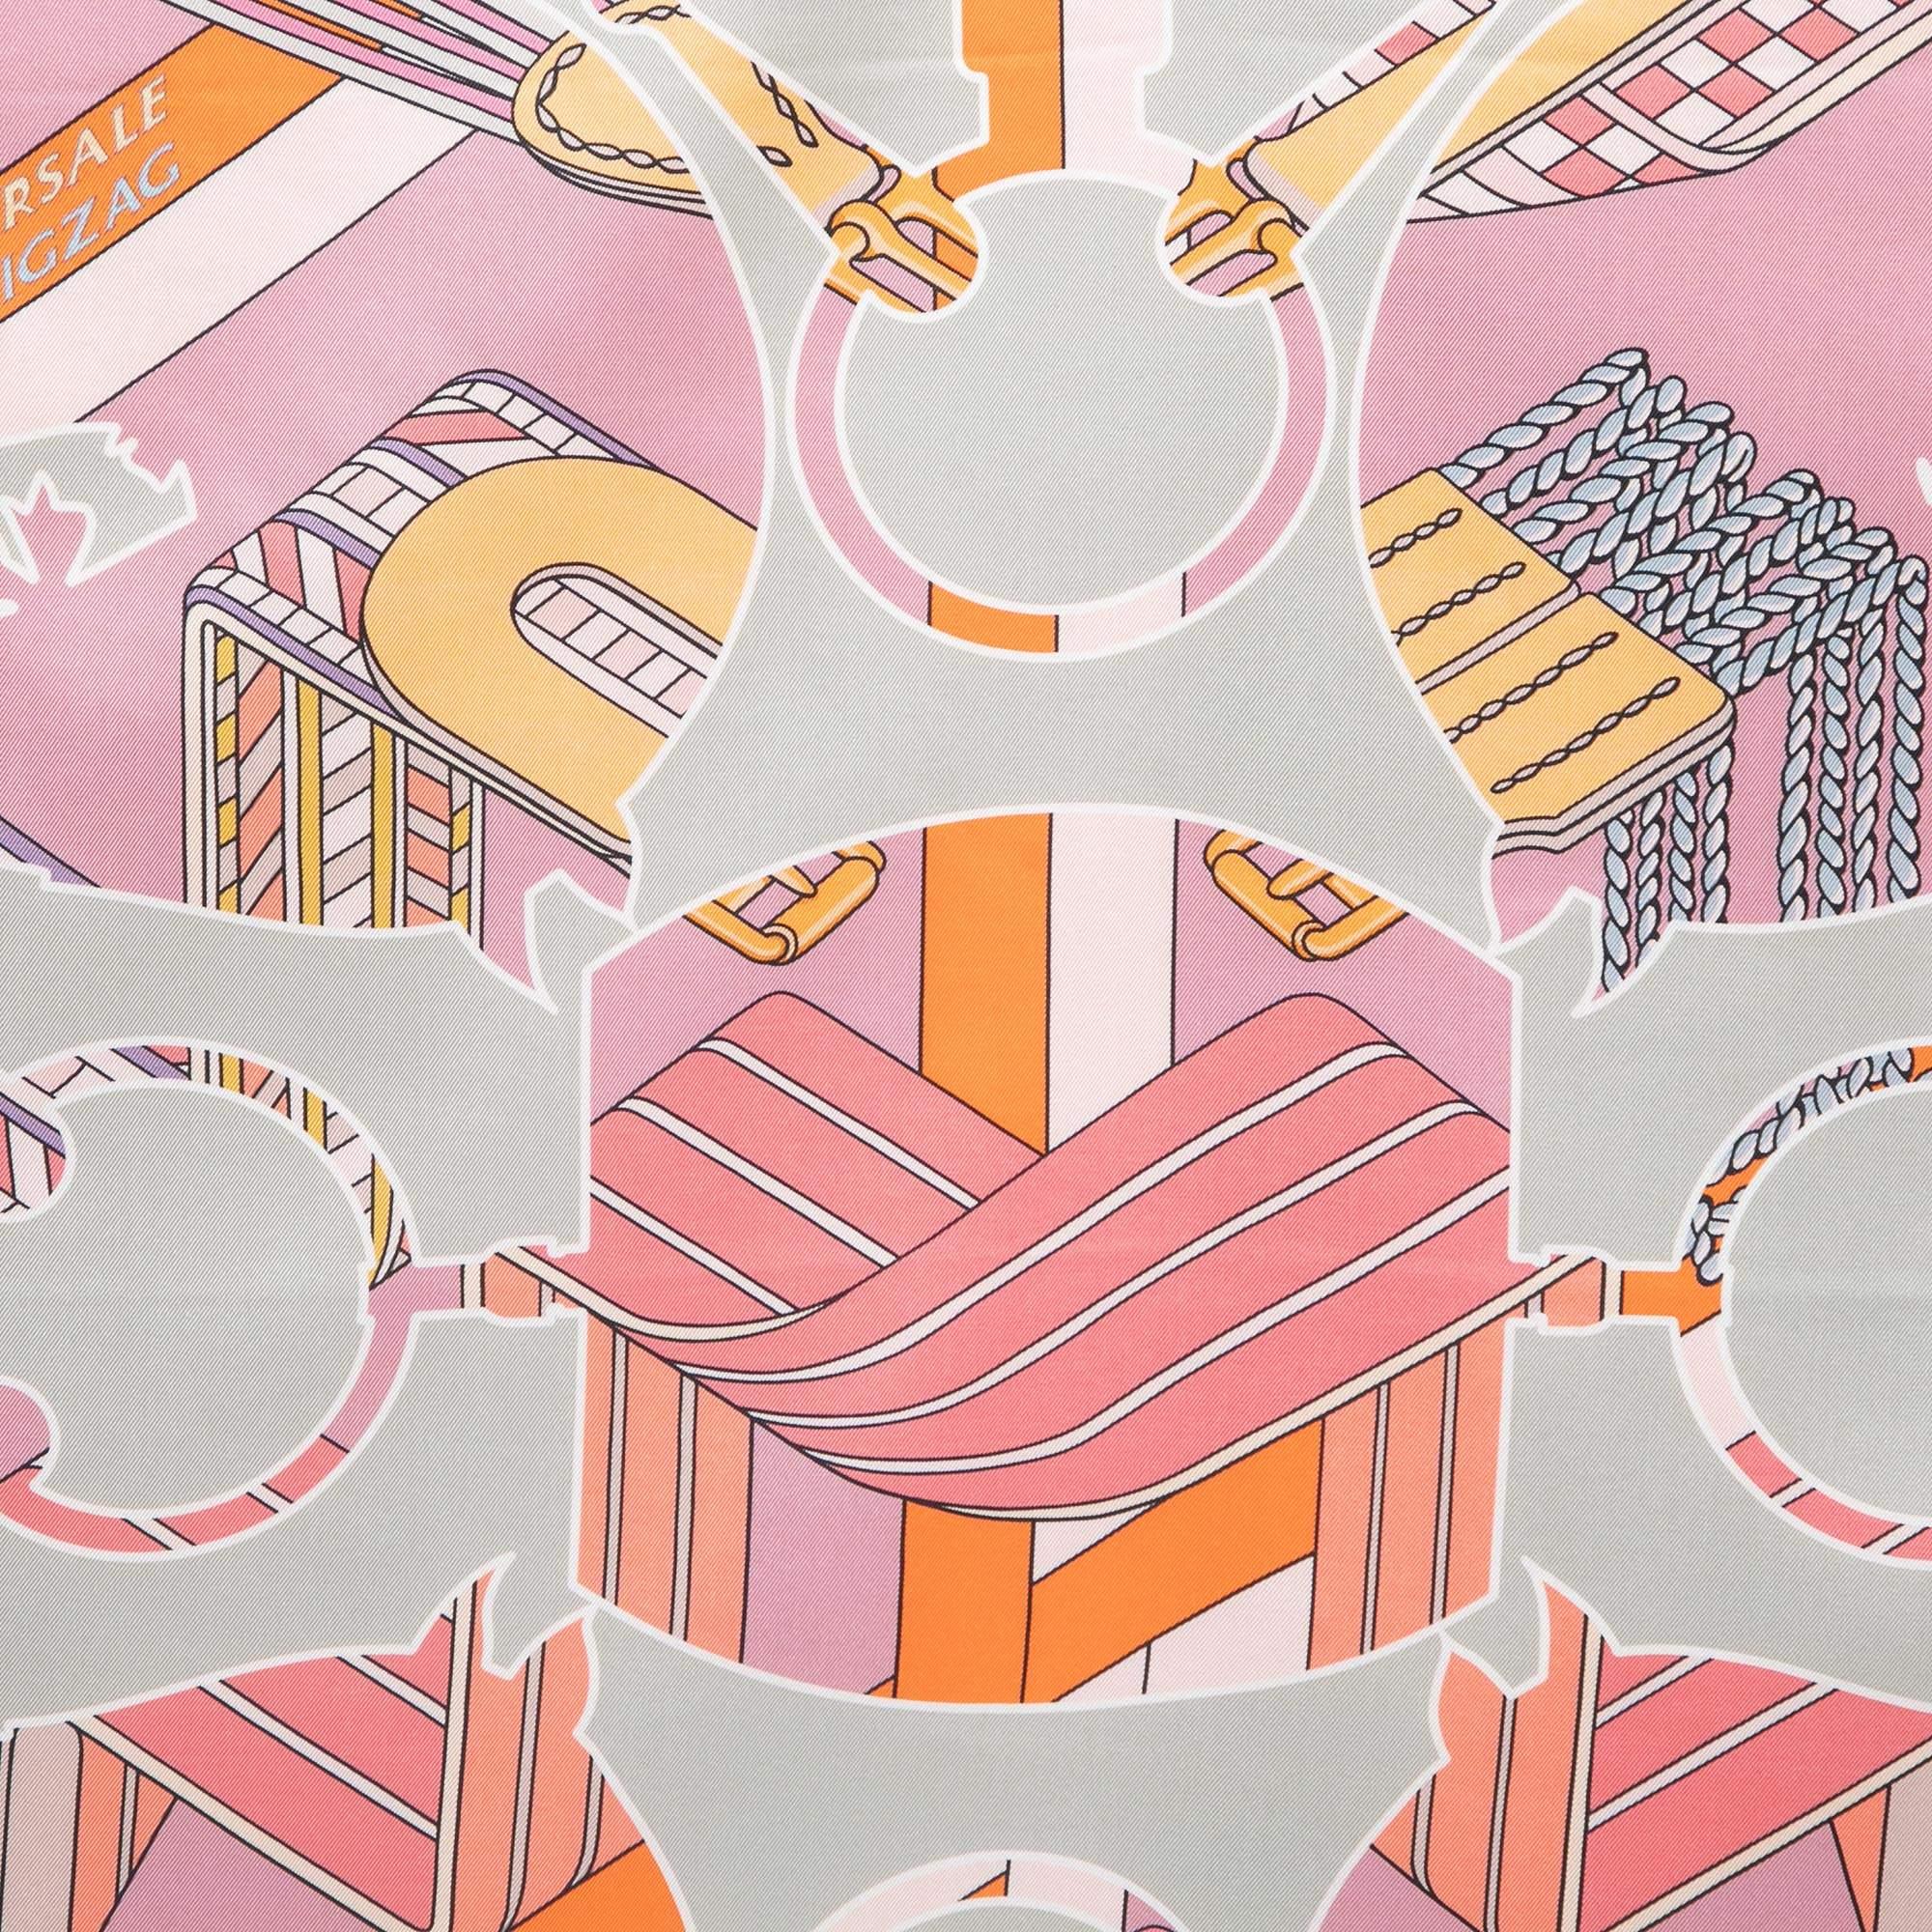 An essential Hermès accessory, the label's scarves are as iconic as any other creation from the brand and are collector's favorites. This rendition is carefully cut from luxurious silk and designed with an intricate print. There are endless ways to